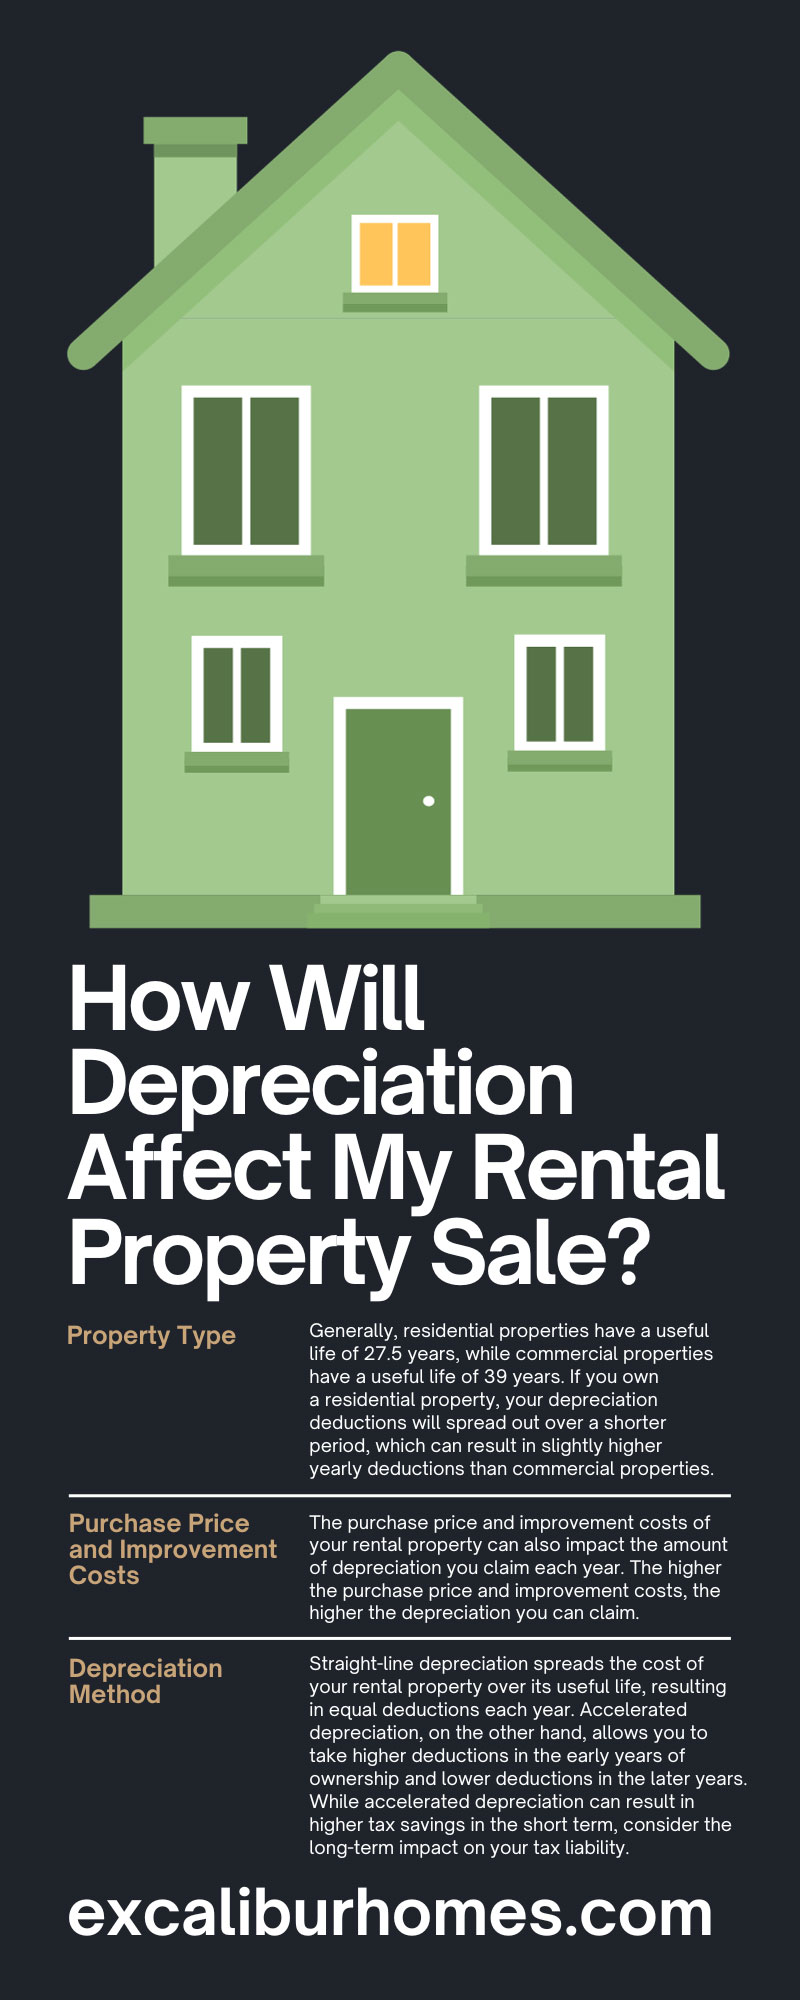 How Will Depreciation Affect My Rental Property Sale?